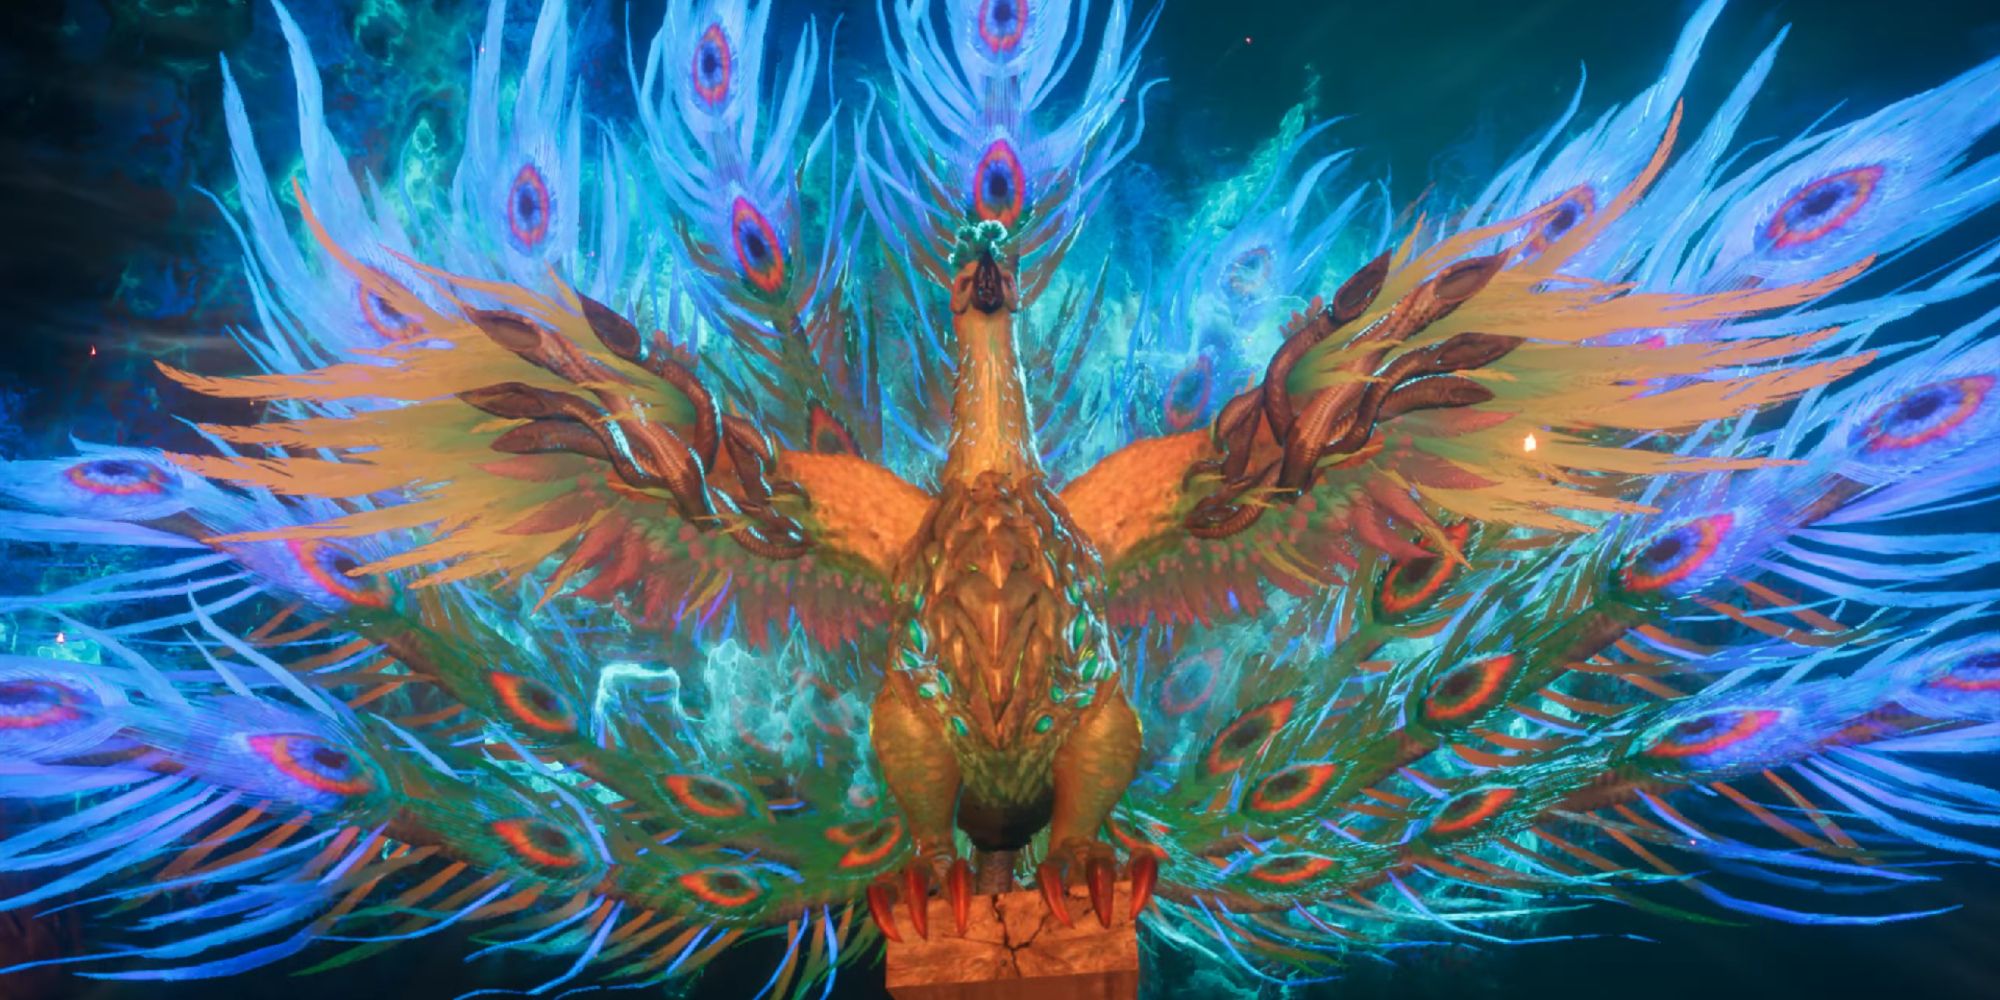 Emberplume Kimono unleashes peacock feathers engulfed in blue flames during a cutscene in Wild Hearts.